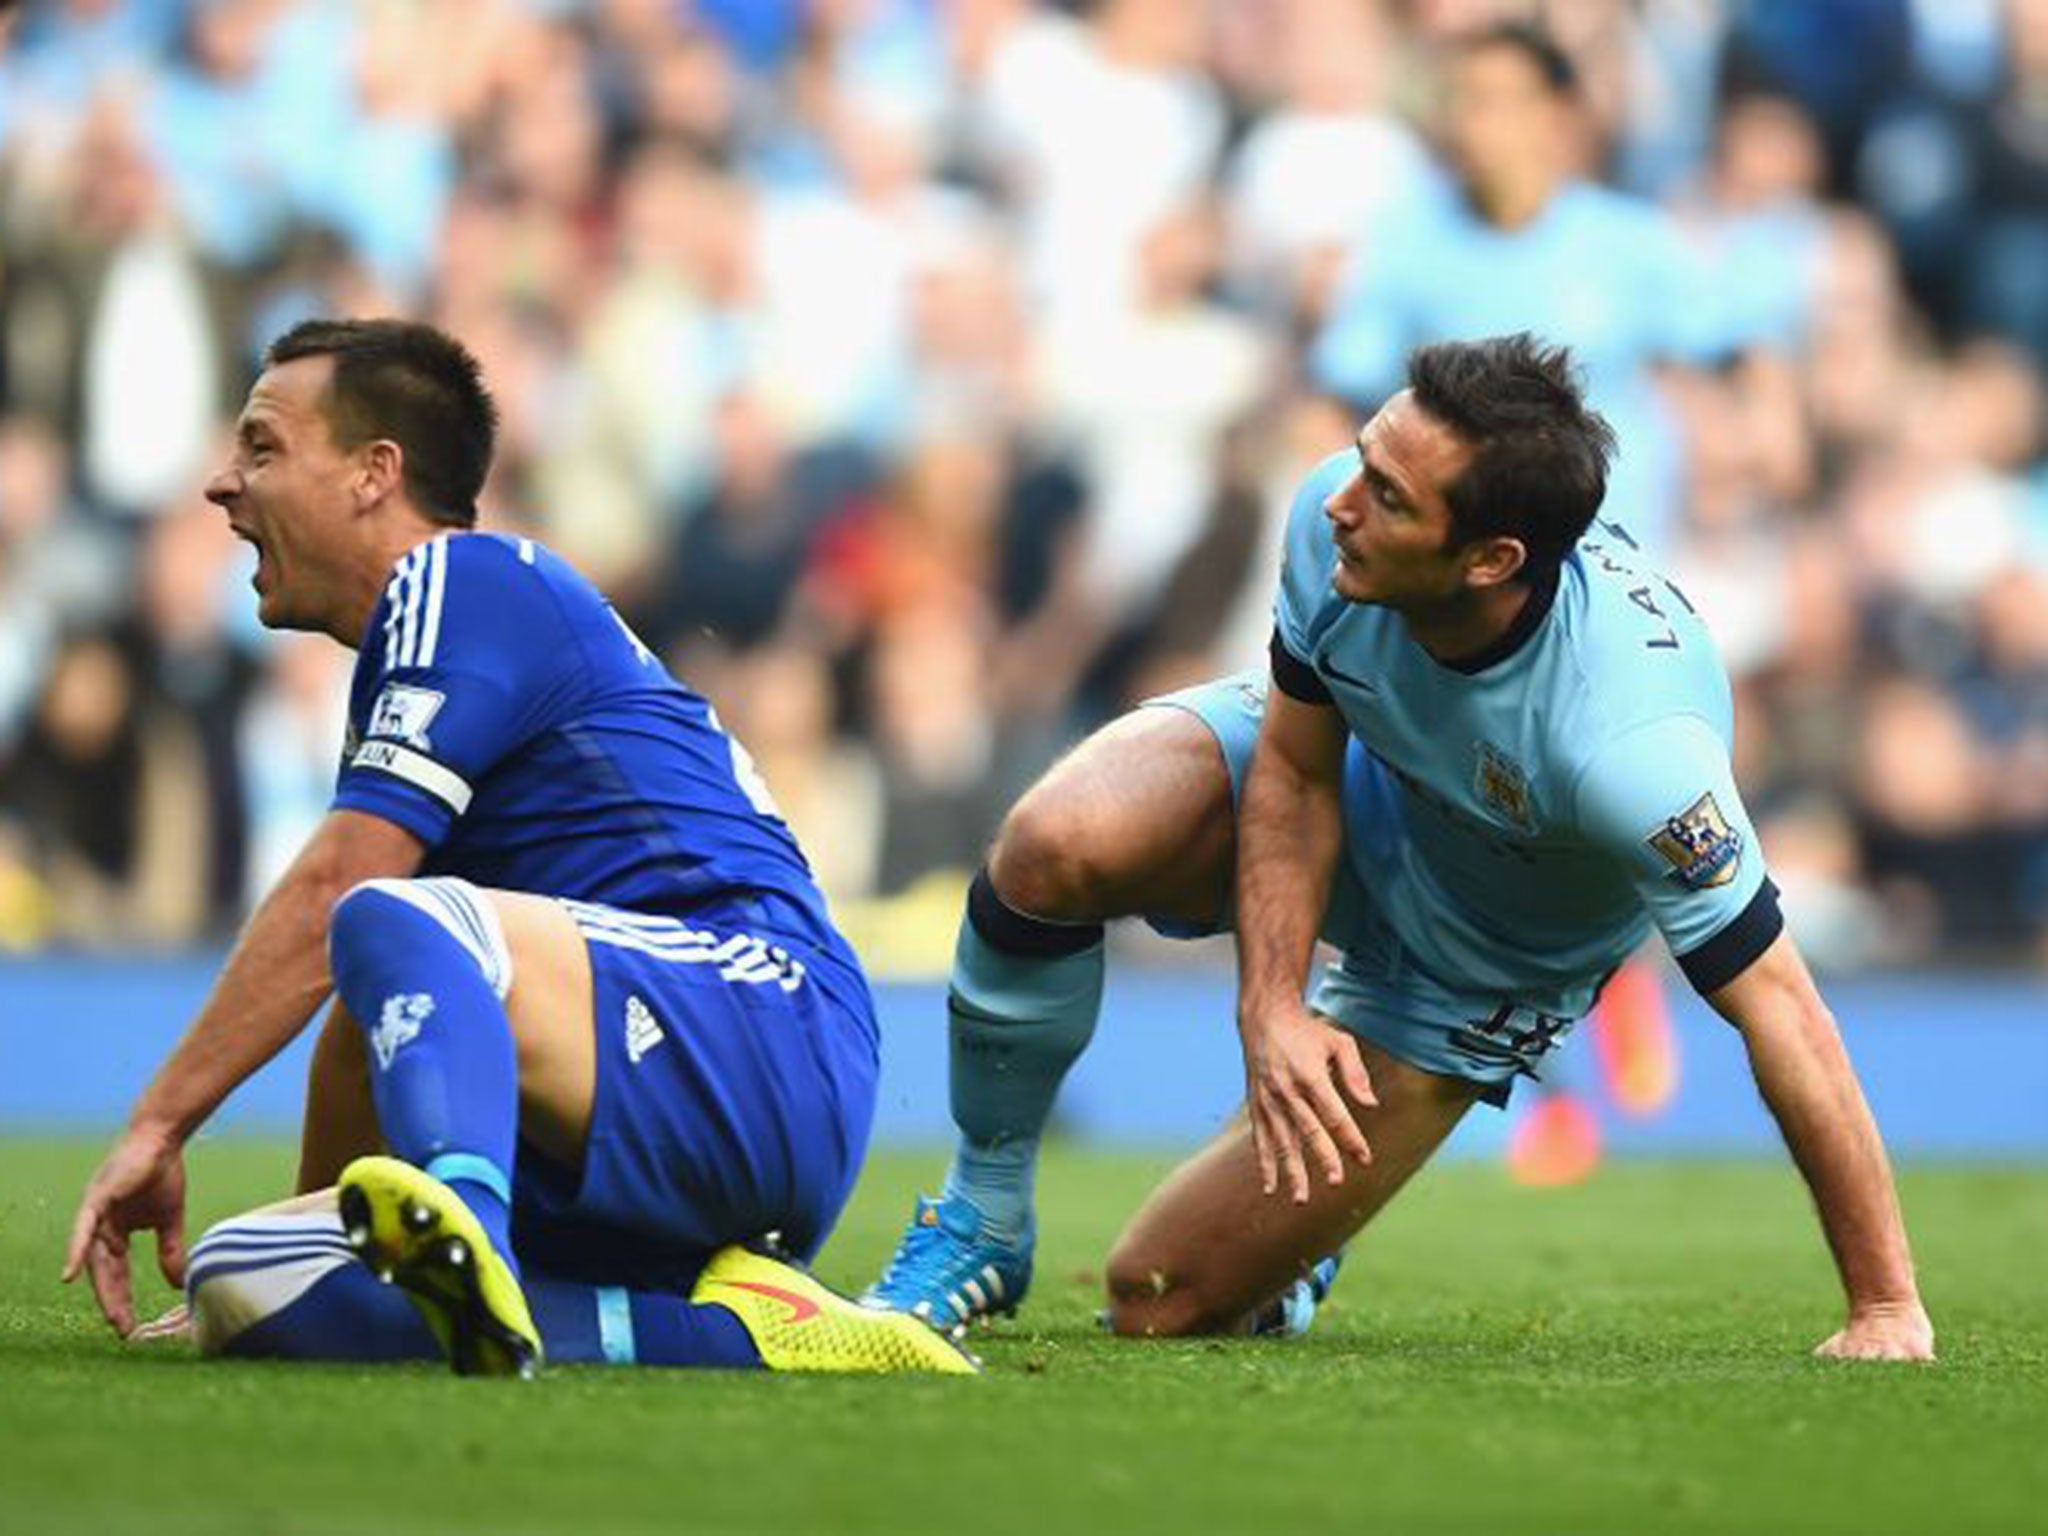 John Terry curses his side’s luck as his former team-mate Frank Lampard equalises for City against Chelsea on Sunday